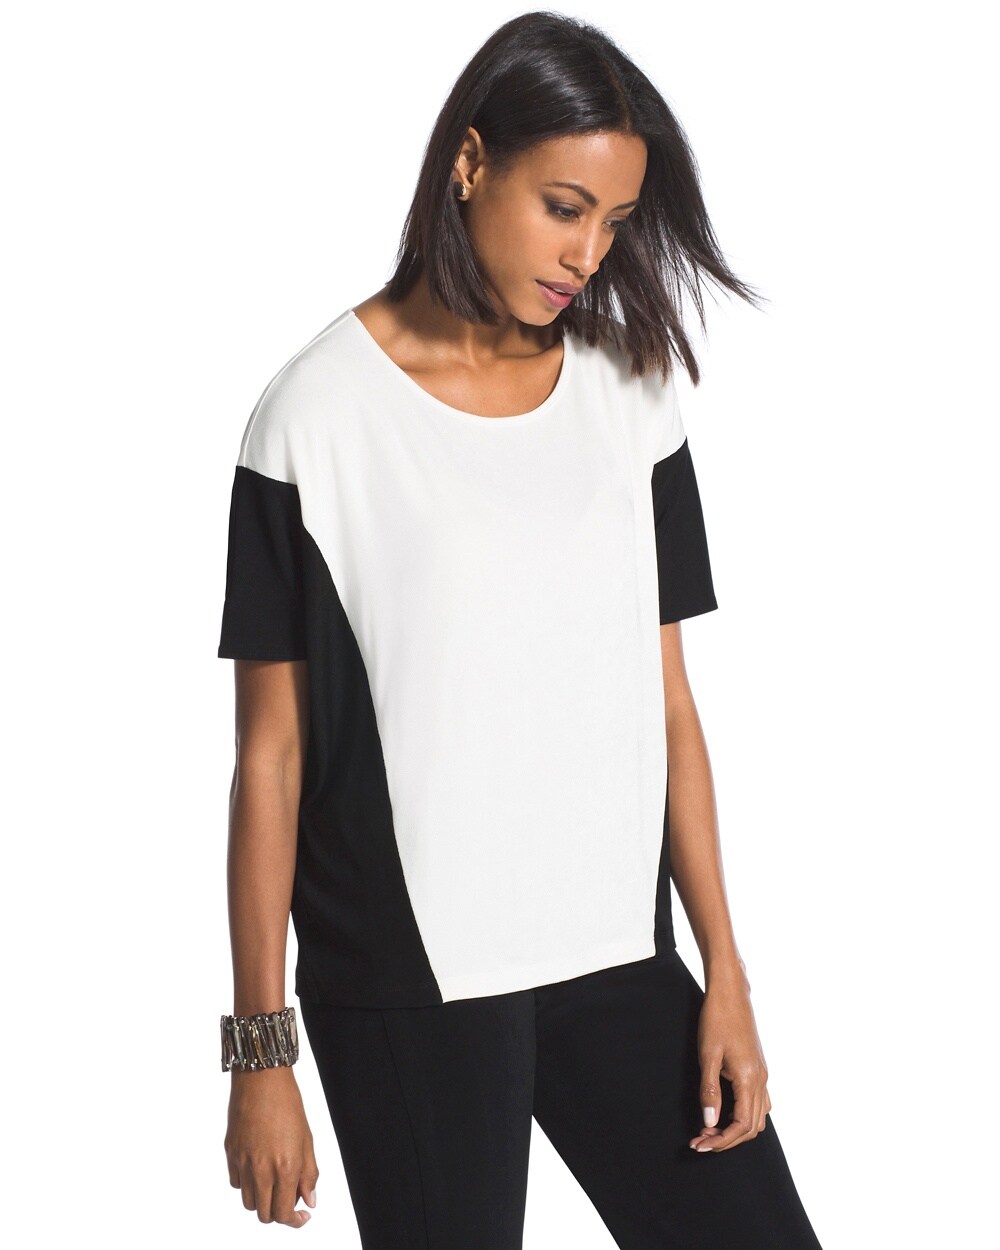 Travelers Classic Black-and-White Top